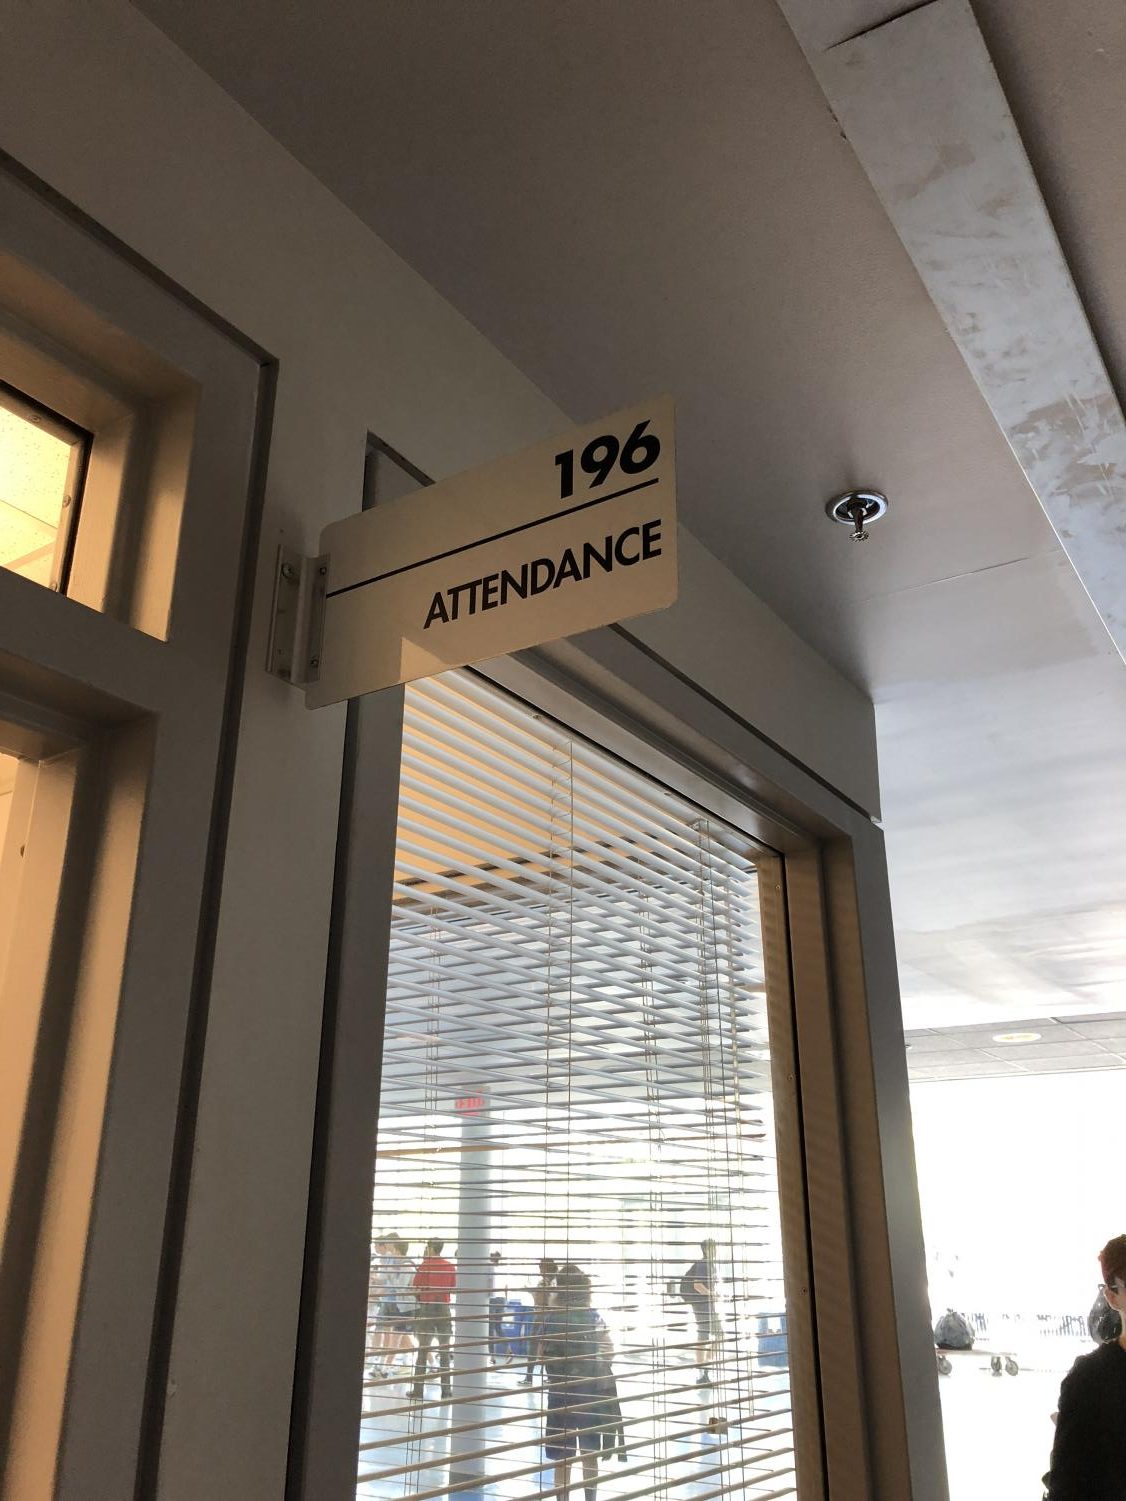 According to the attendance office, most students usually come to school late on Mondays.